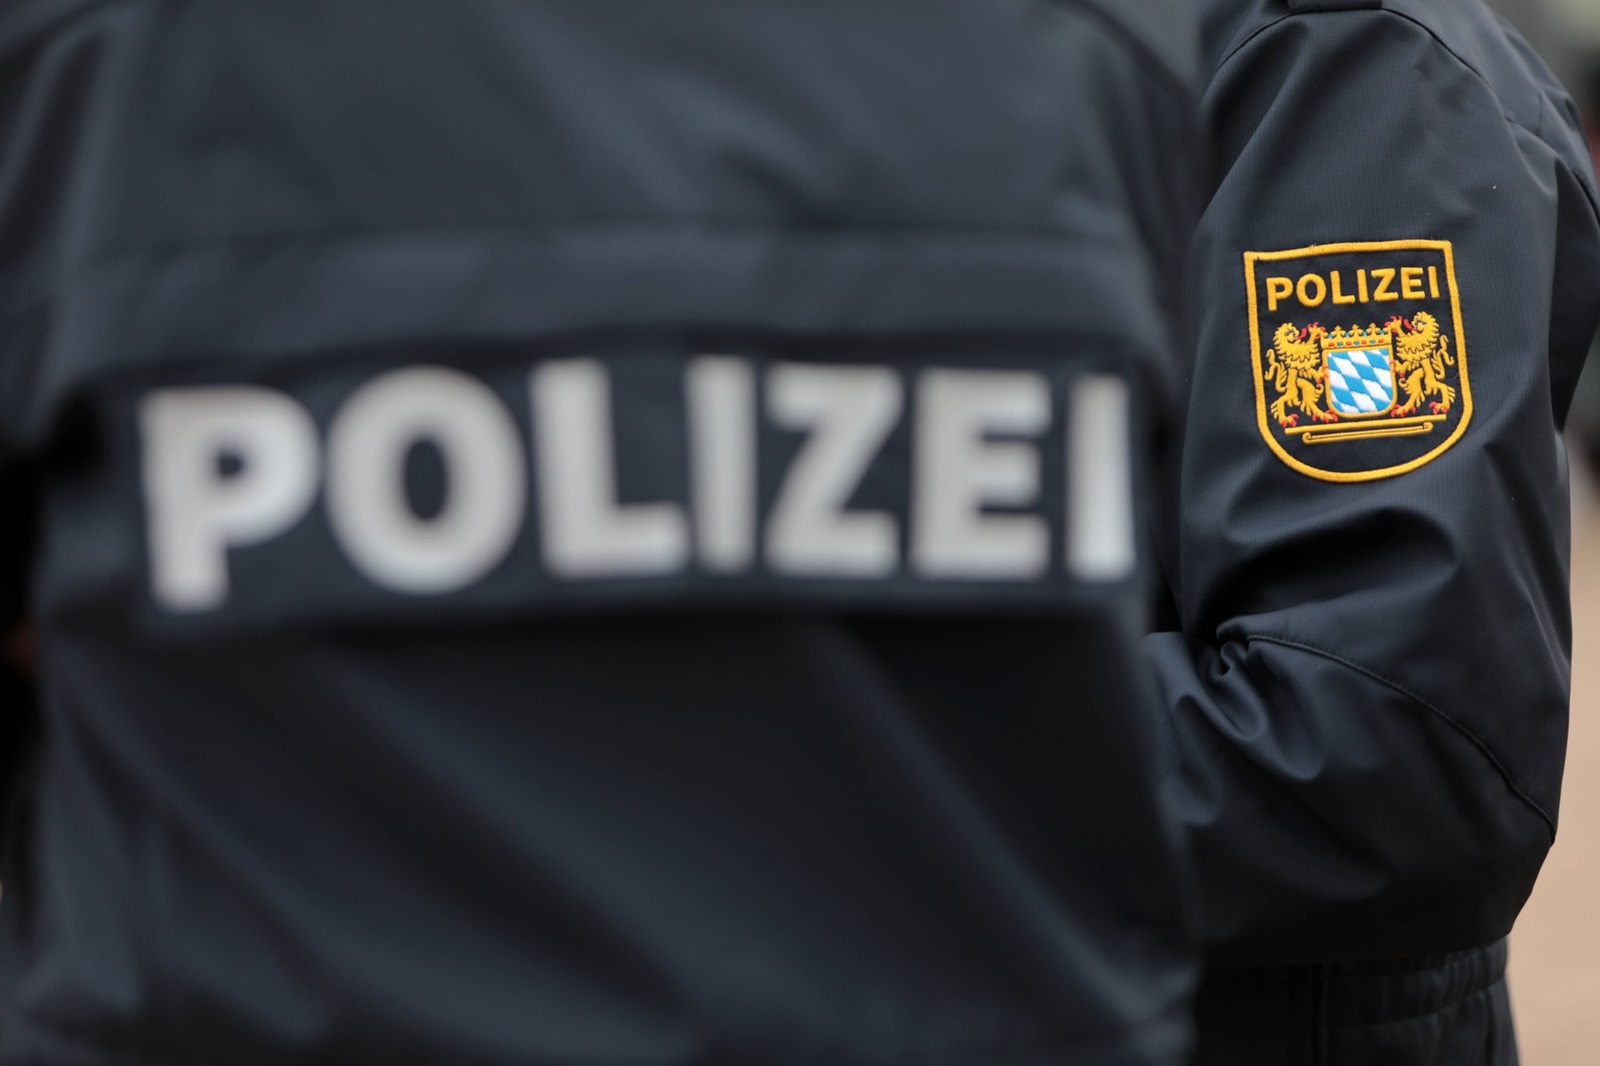 Schriftzug Polizei auf einer Uniform der Polizei Bayern sowie Abzeichen mit Landeswappen der Polizei Bayern. Länderübergreifende Großübung der Spezialeinheiten Counter Terrorism Exercice CTE 2024. Sulzbach-Rosenberg Bayern Deutschland *** Police lettering on a Bavarian police uniform and badge with the Bavarian police coat of arms Major interstate exercise of the special units Counter Terrorism Exercice CTE 2024 Sulzbach Rosenberg Bavaria Germany,Image: 858095462, License: Rights-managed, Restrictions: imago is entitled to issue a simple usage license at the time of provision. Personality and trademark rights as well as copyright laws regarding art-works shown must be observed. Commercial use at your own risk., Credit images as "Profimedia/ IMAGO", Model Release: no, Credit line: Björn Trotzki / imago stock&people / Profimedia